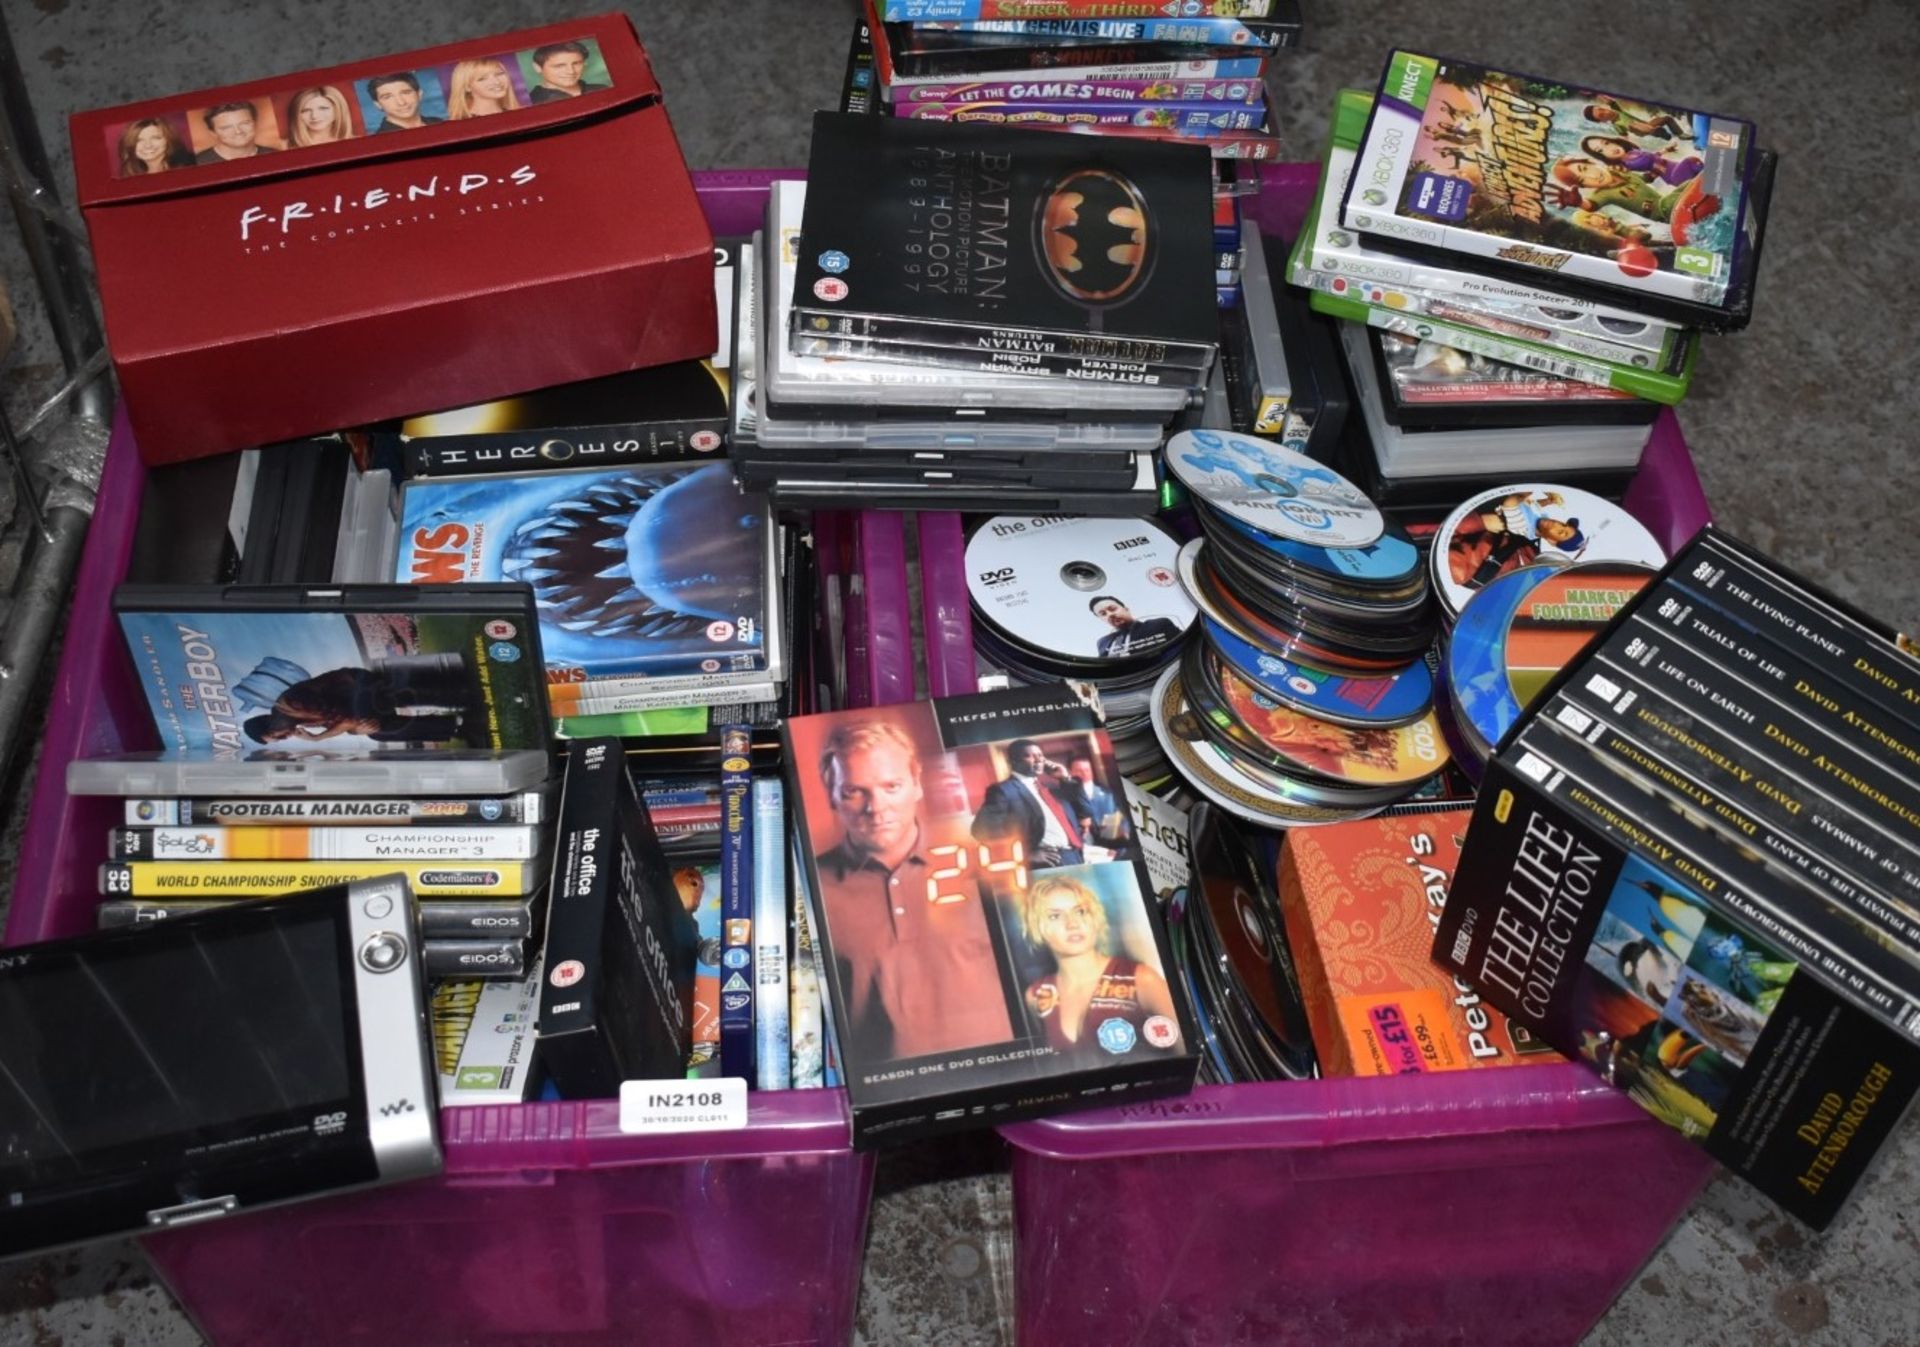 1 x Large Collection of DVD Films and Games - Plus Box Sets and Portable DVD Player - Ref: In2108